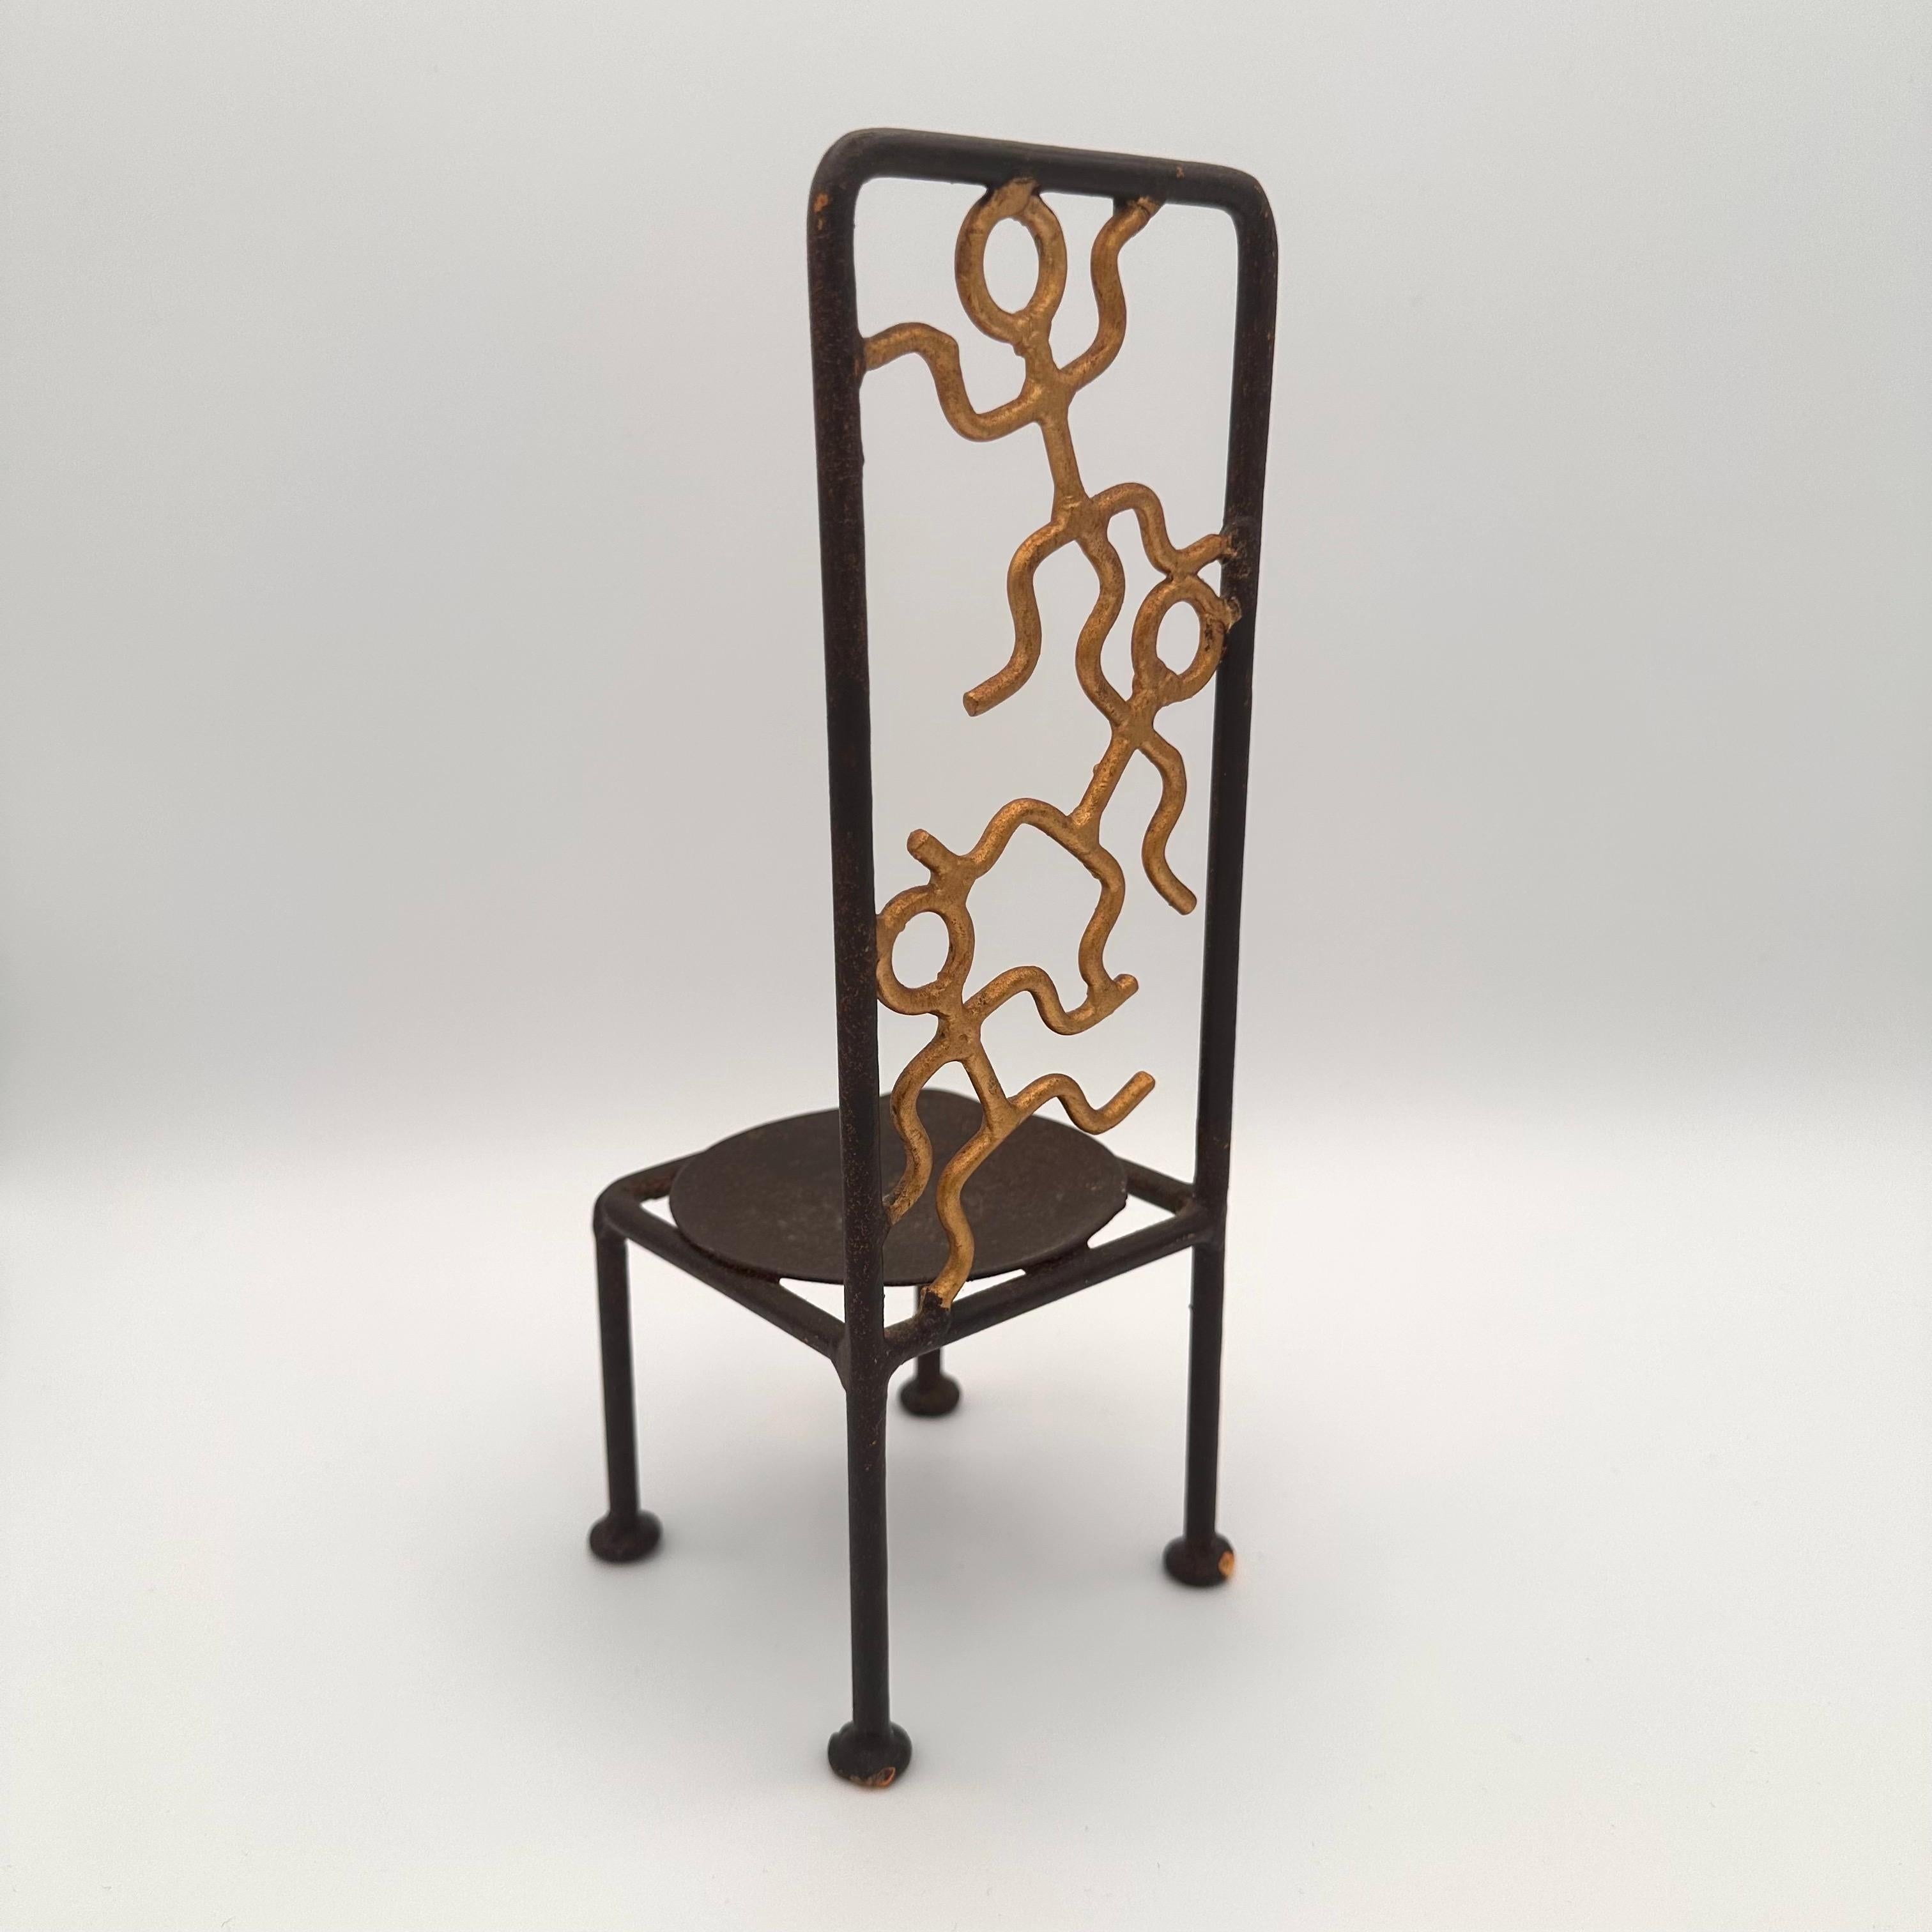 Vintage Handmade Miniature Metal Chair with Stick Figure Person Motif For Sale 5